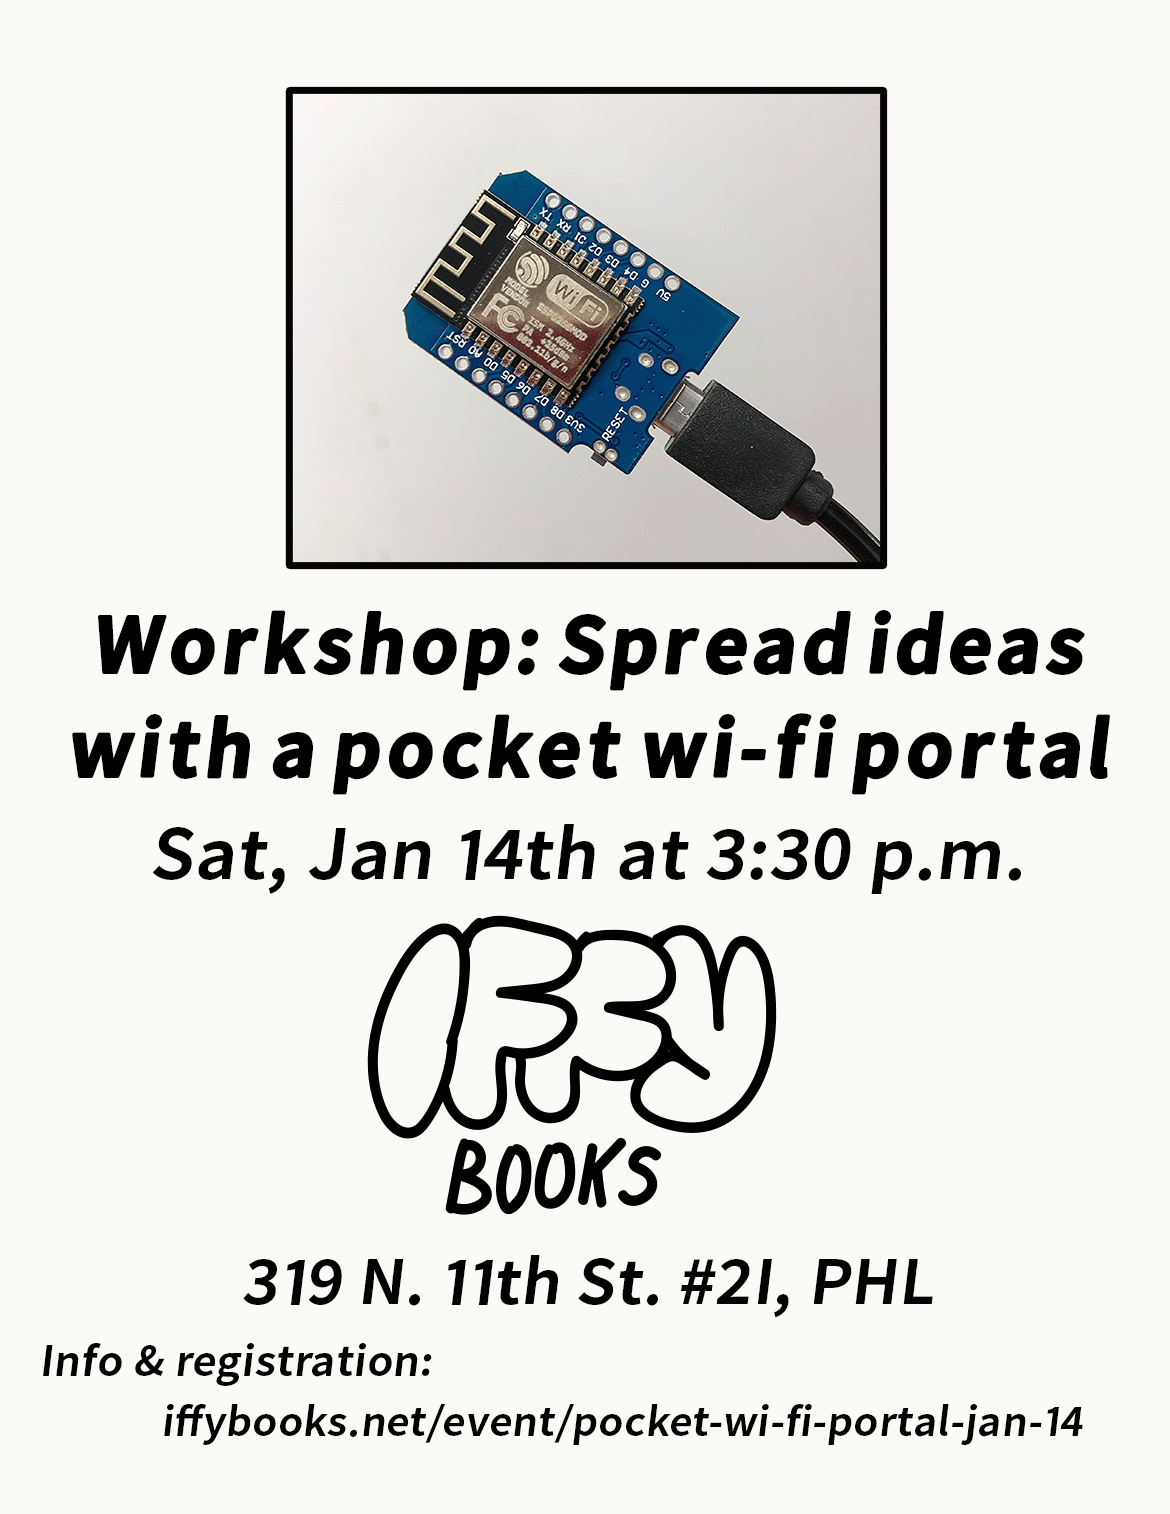 Flyer with a photo of an ESP8266-based development board with the following text: Workshop: Spread ideas with a pocket wi-fi portal Sat, Jan 14th at 3:30 p.m. Iffy Books 319 N. 11th St. #2I, PHL Info & registration: iffybooks.net/event/pocket-wi-fi-portal-jan-14